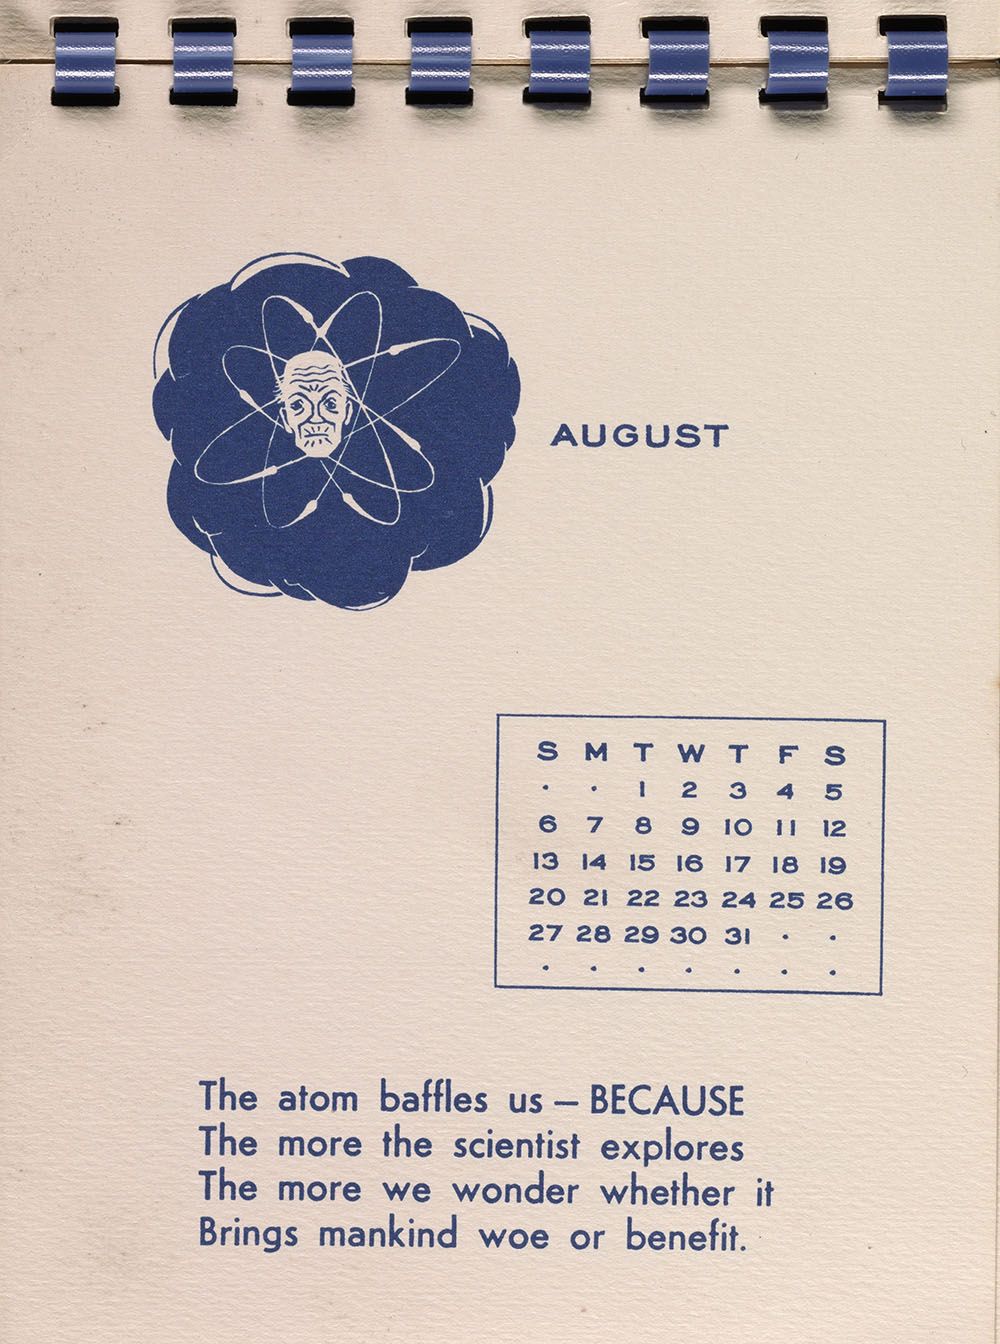 August 1950 page from William Adams Delano holiday card